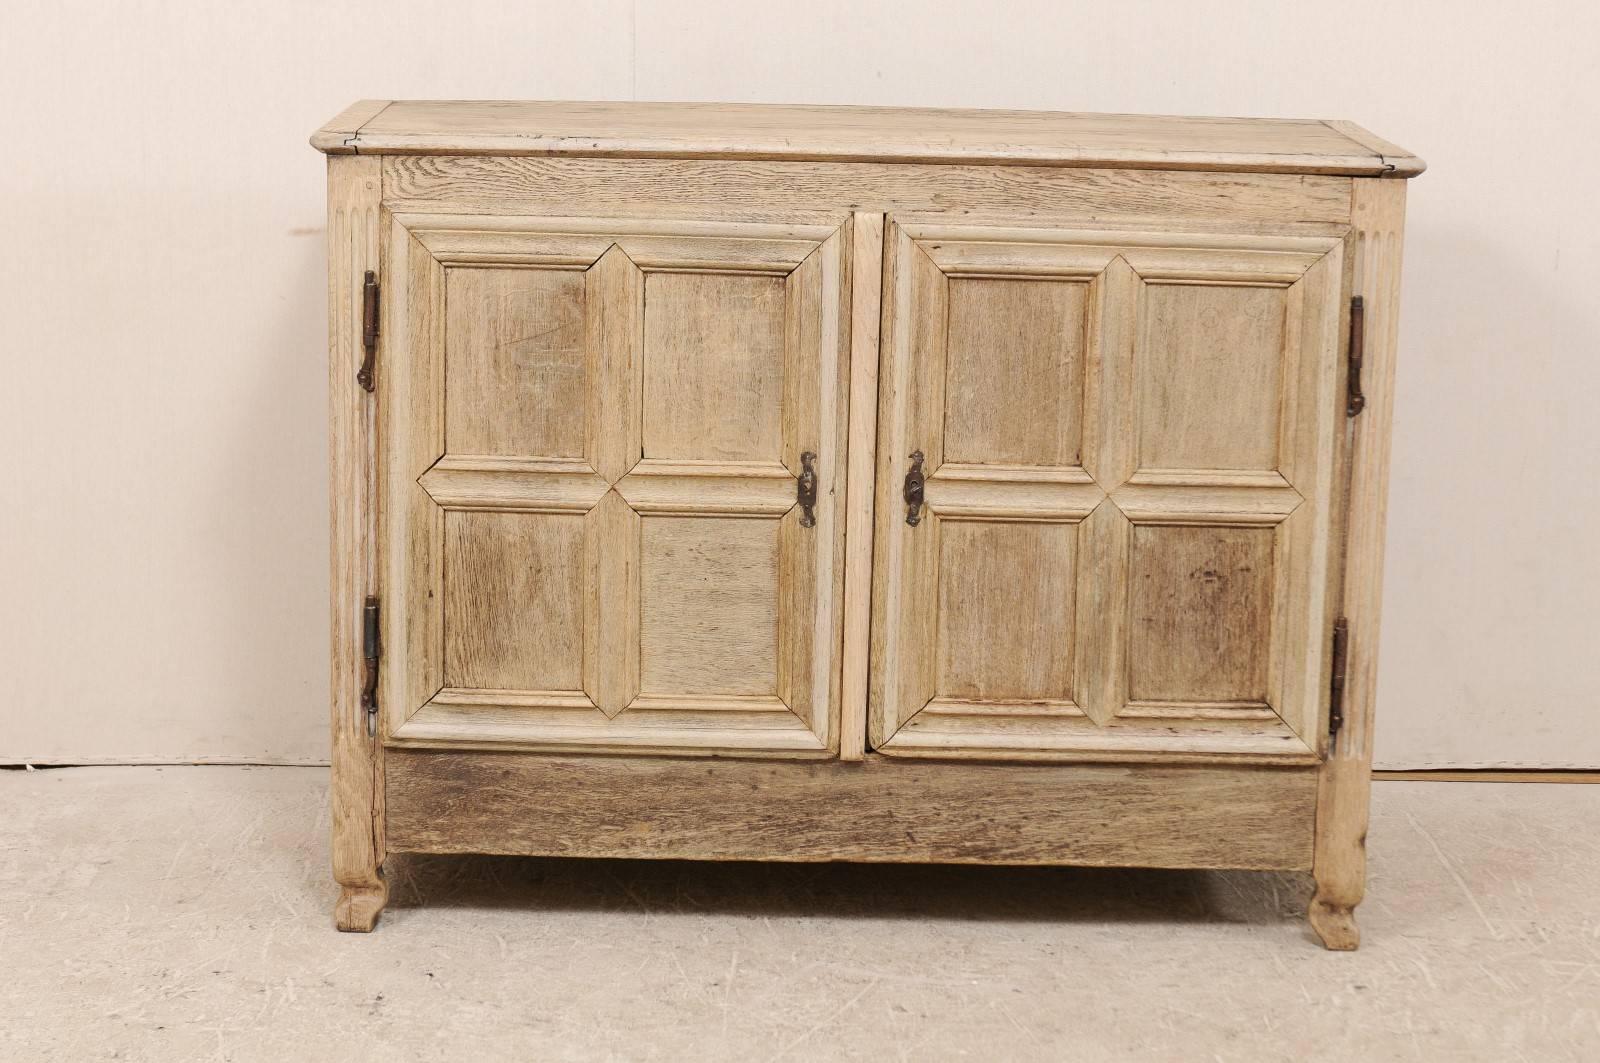 A French 18th century wood cabinet. This French buffet of bleached oak features two doors, each with four recessed panels, which open with a key to an inner shelf. There are squared, inset panels at each chest side, fluted side posts, and clean